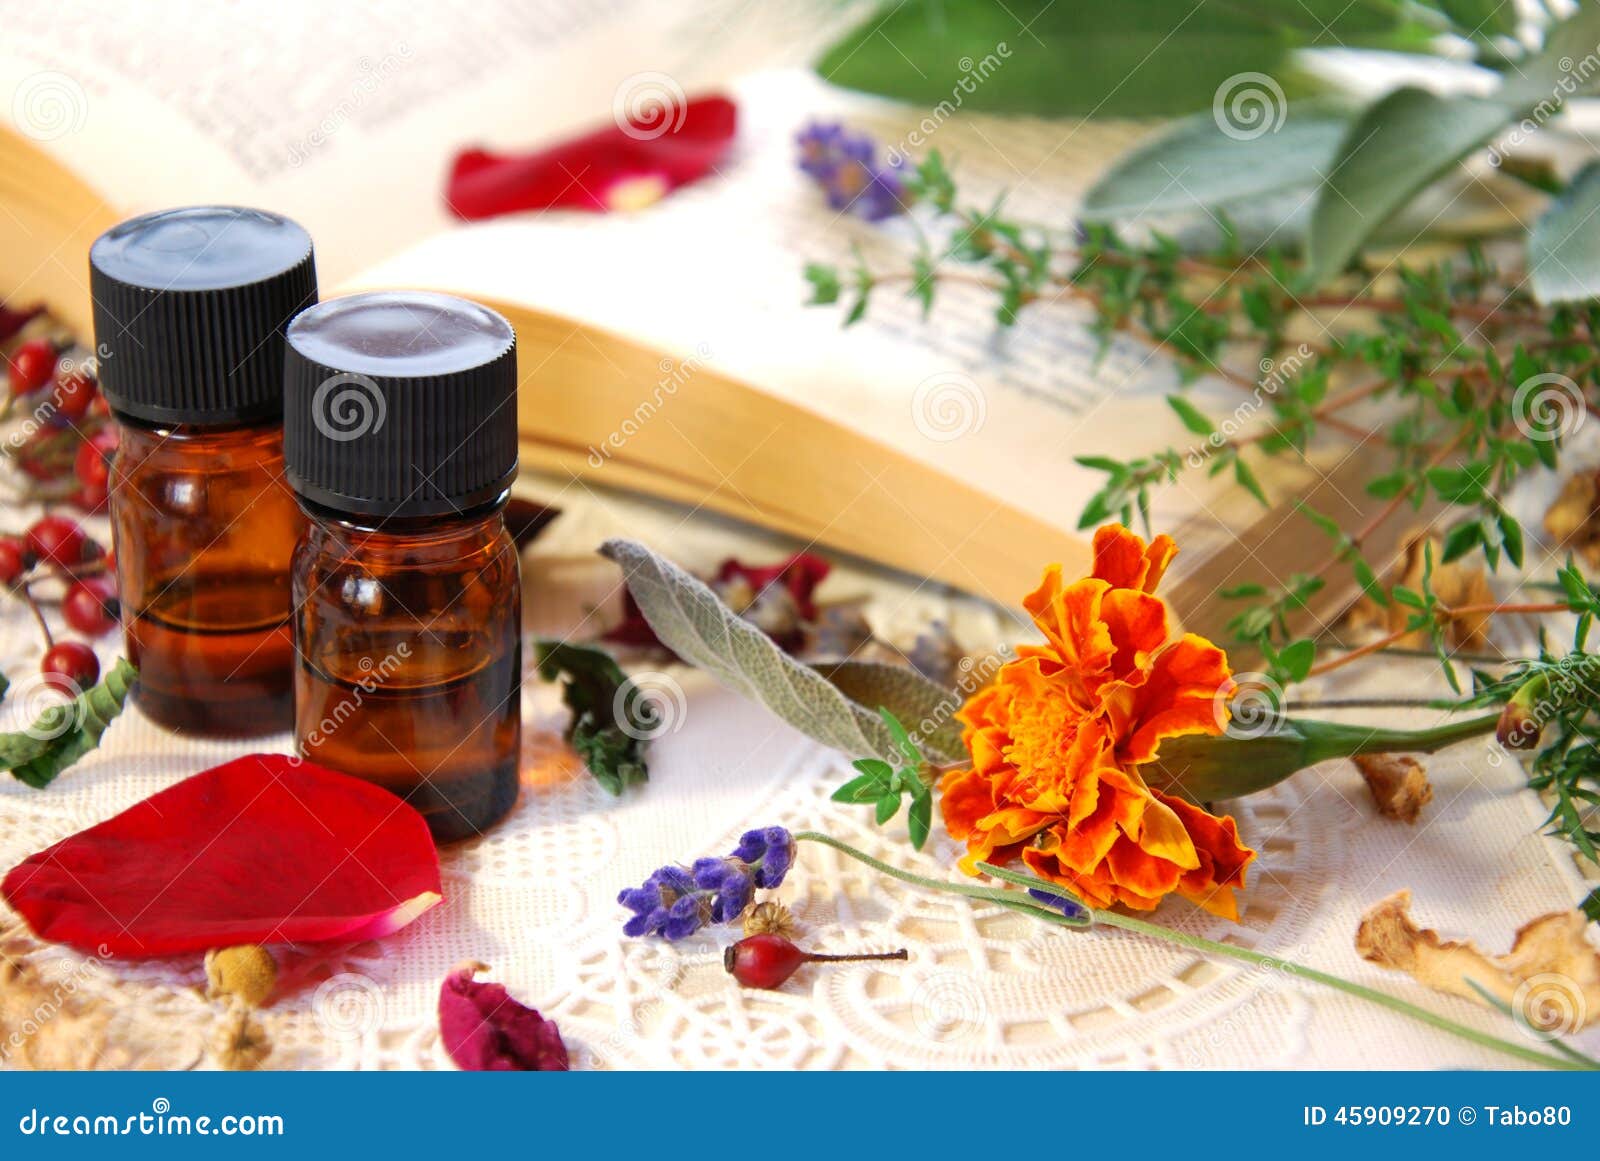 aromatherapy with herbs